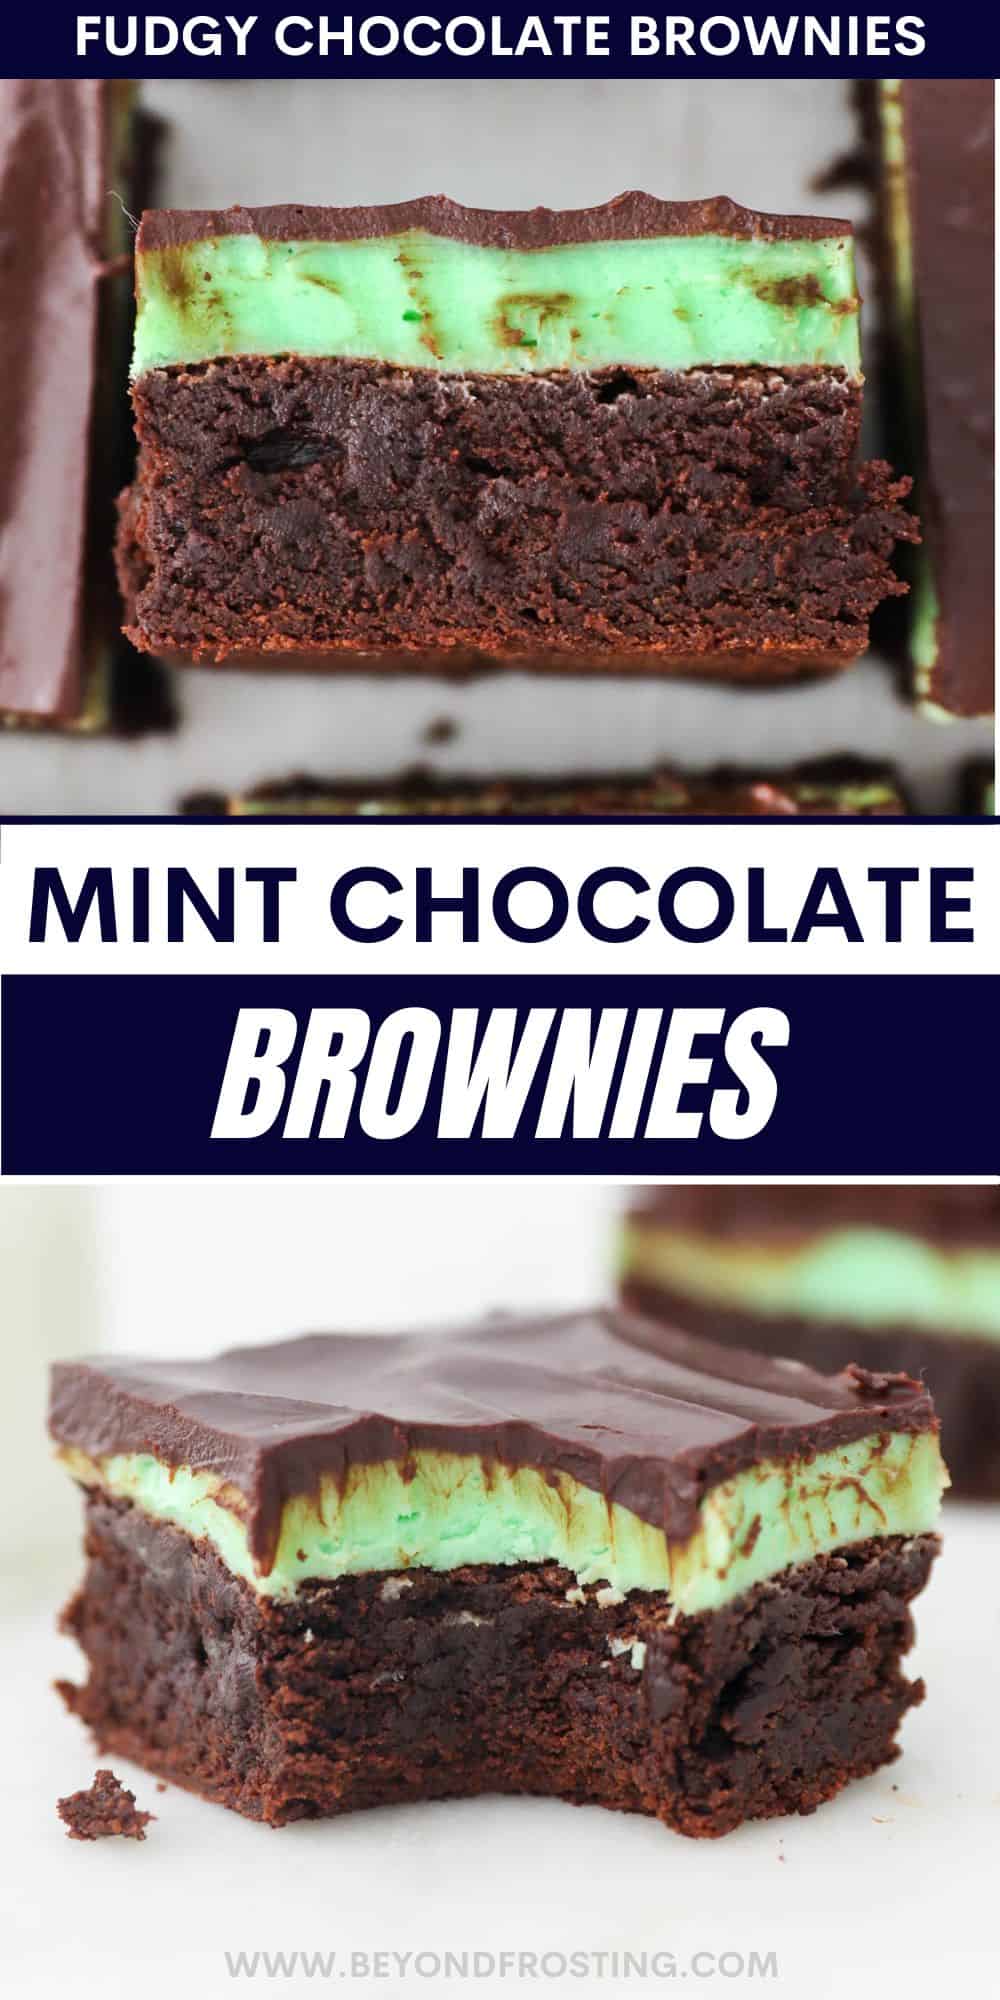 Mint Chocolate Brownies | Beyond Frosting